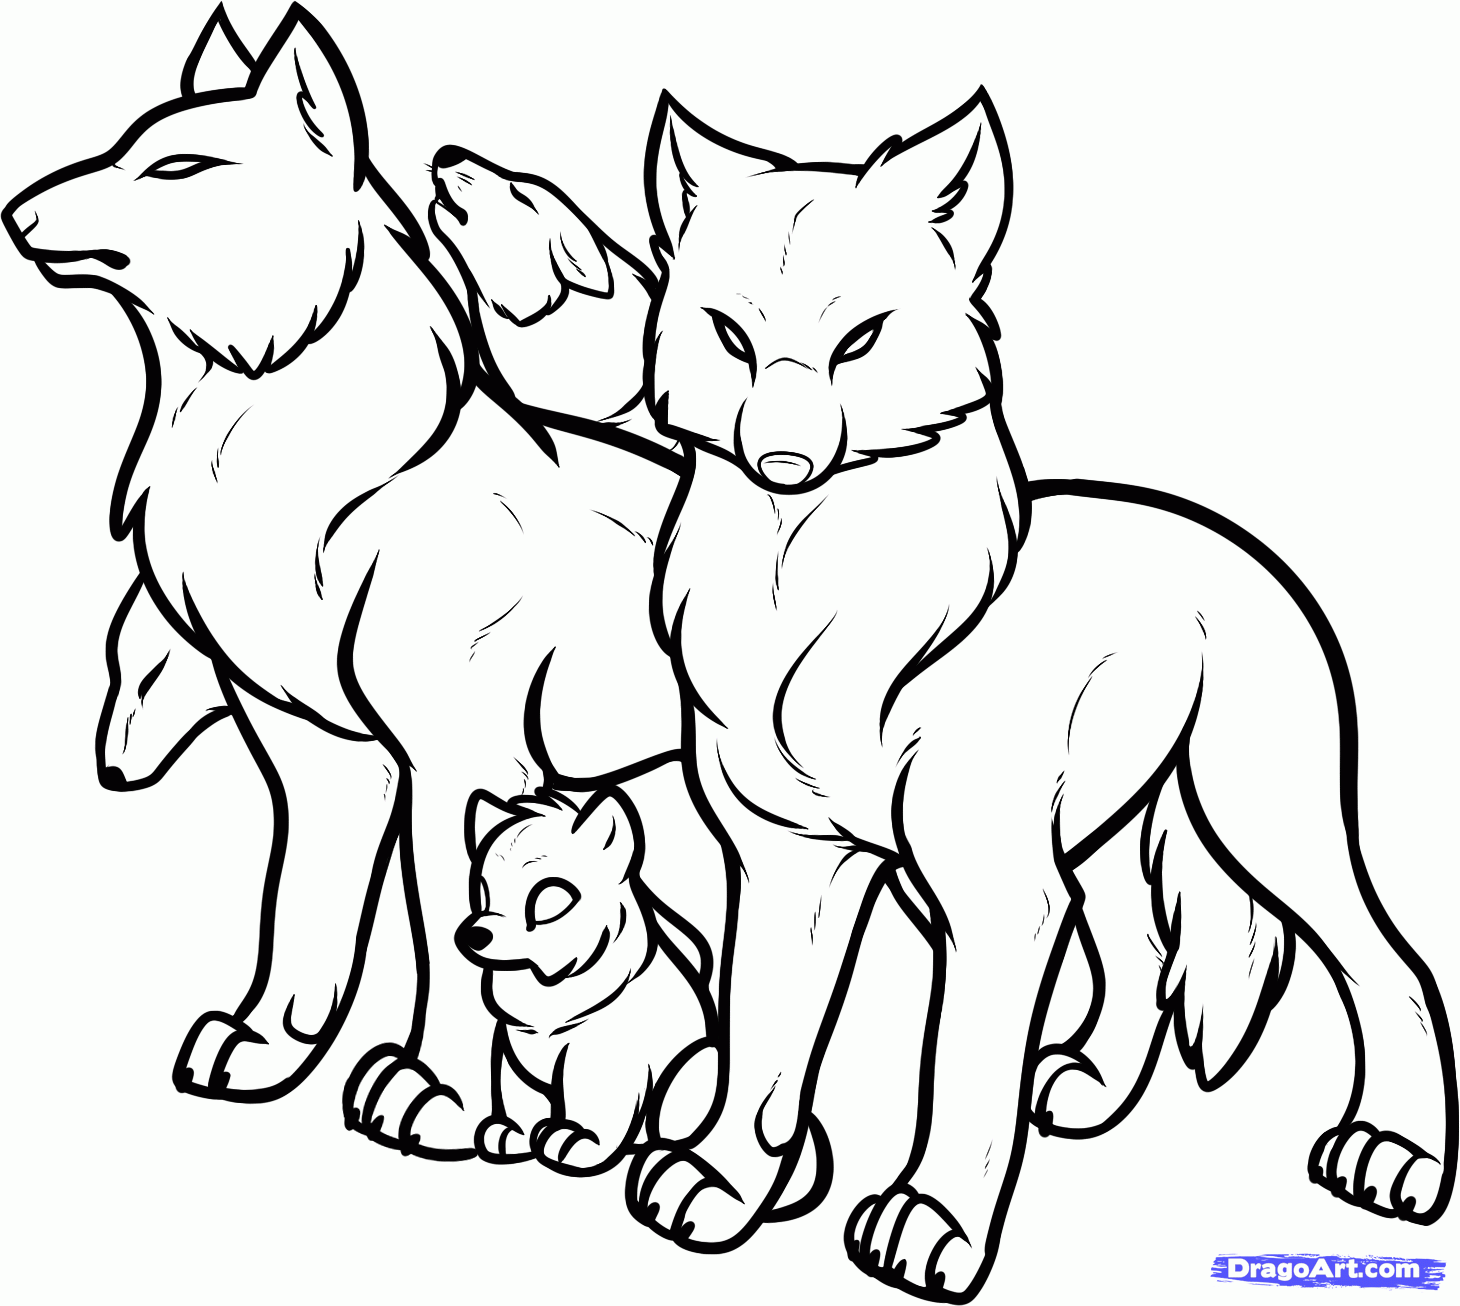 Anime Wolves Fighting Coloring Pages - pic-plum